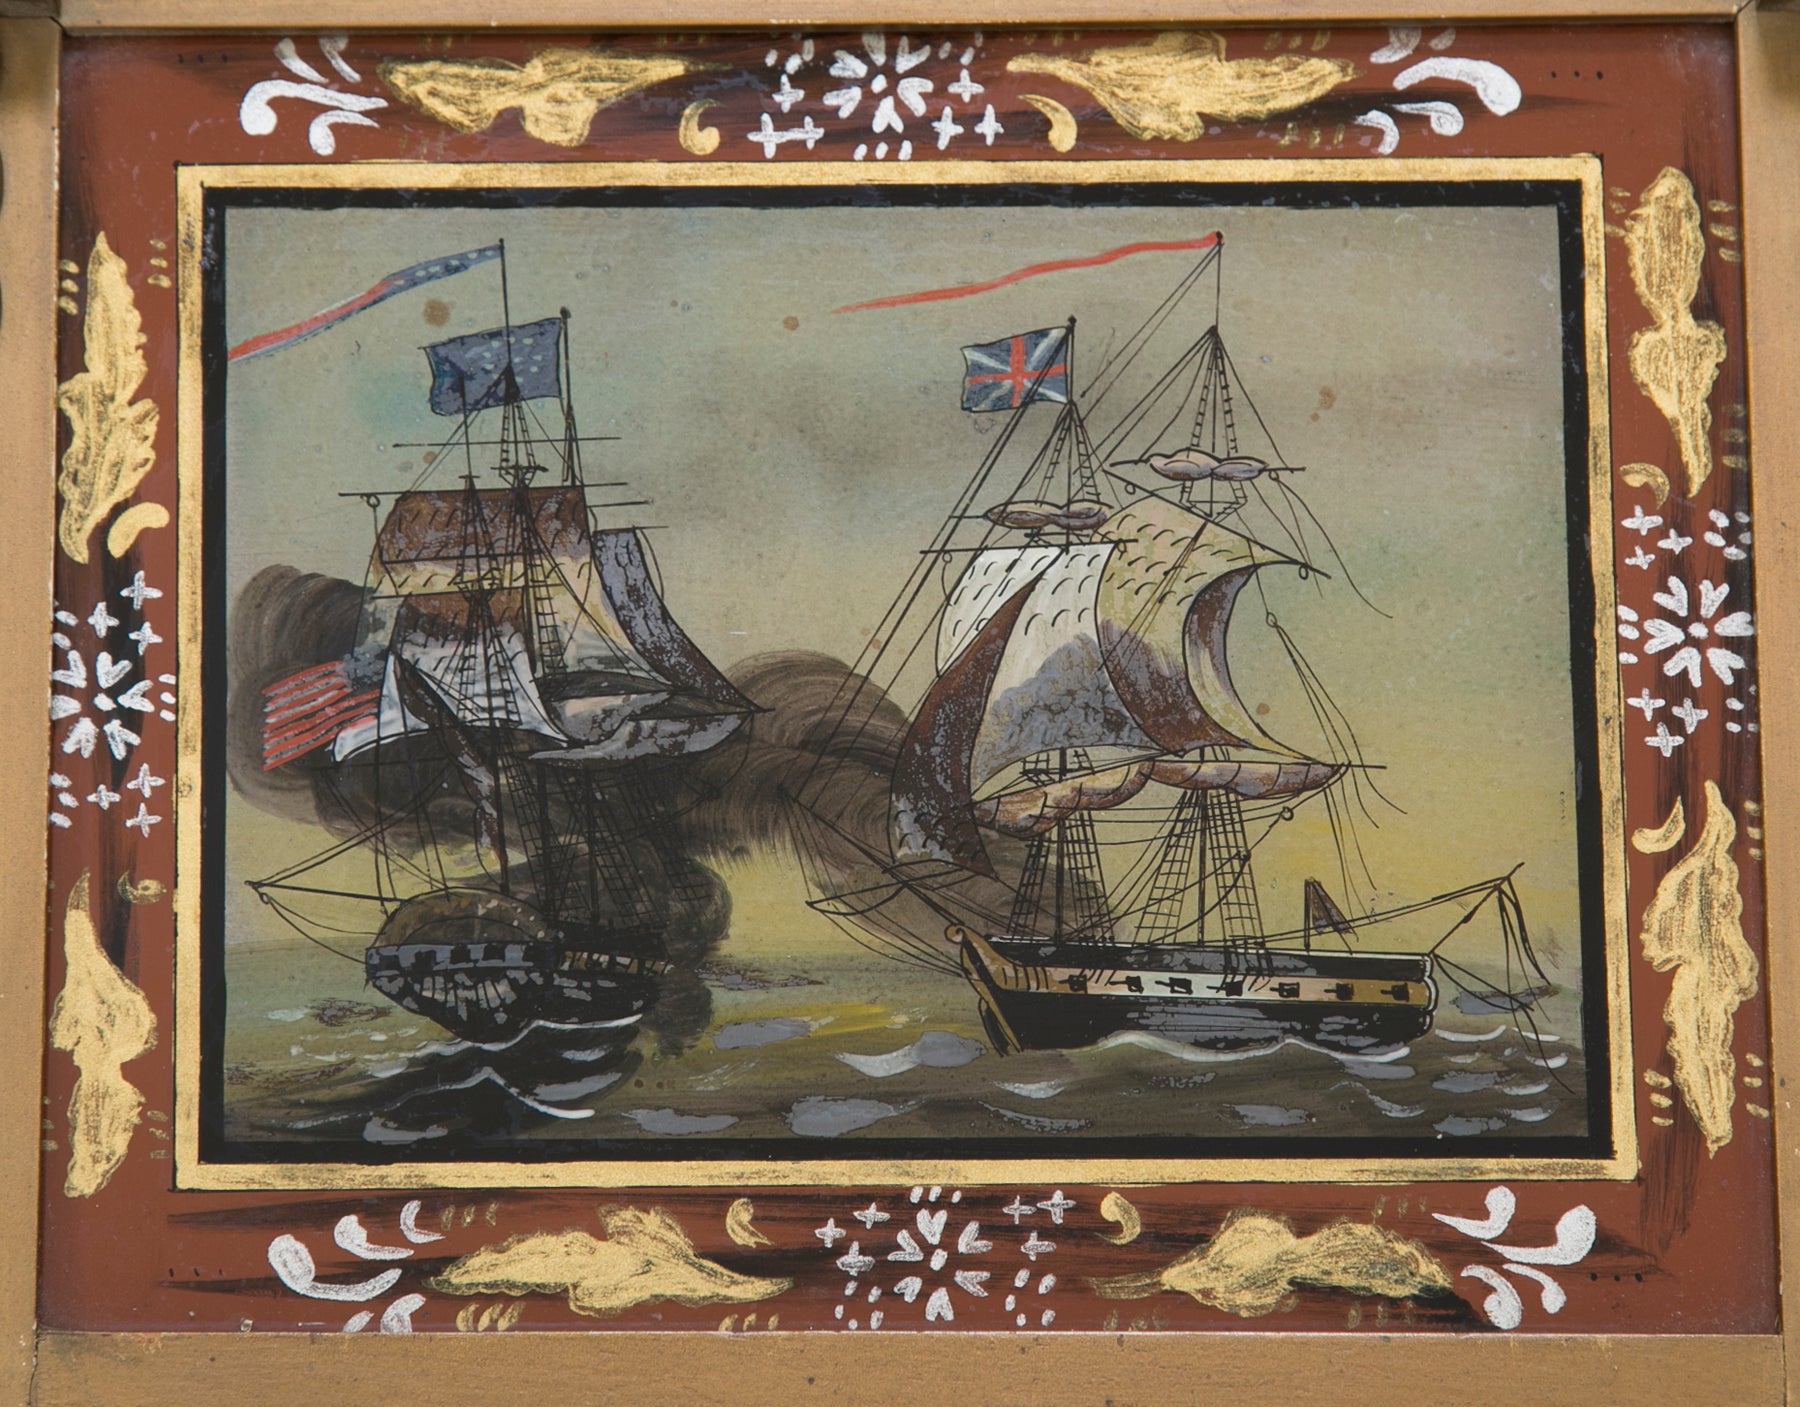 American Federal Mirror with Eglomise Panel of a Maritime Scene from the War of 1812